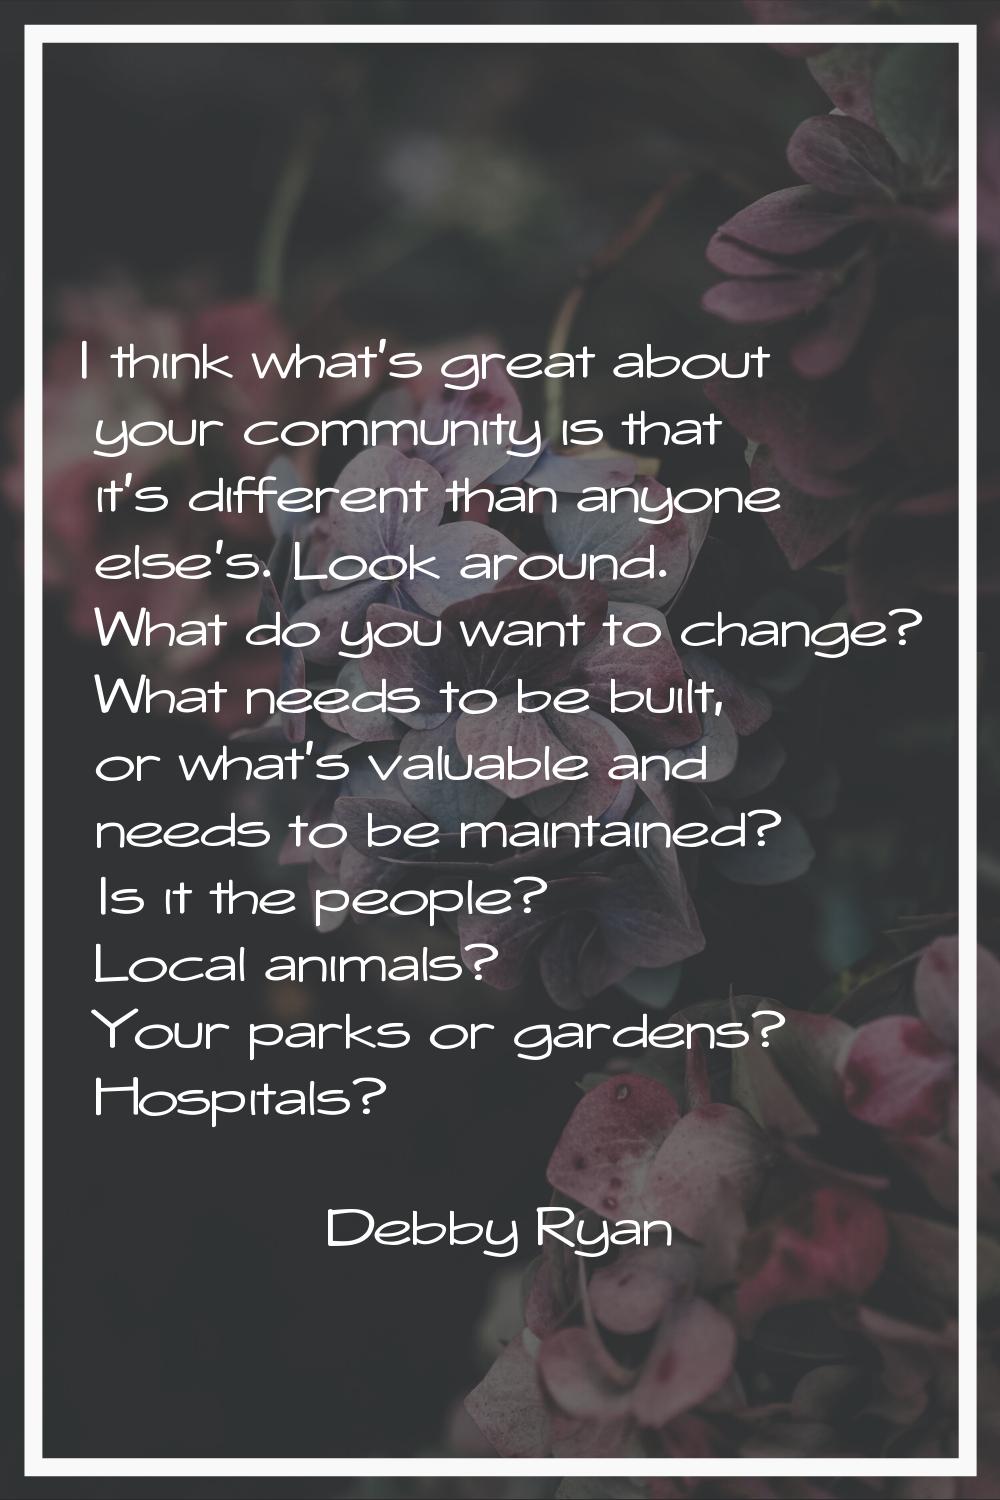 I think what's great about your community is that it's different than anyone else's. Look around. W